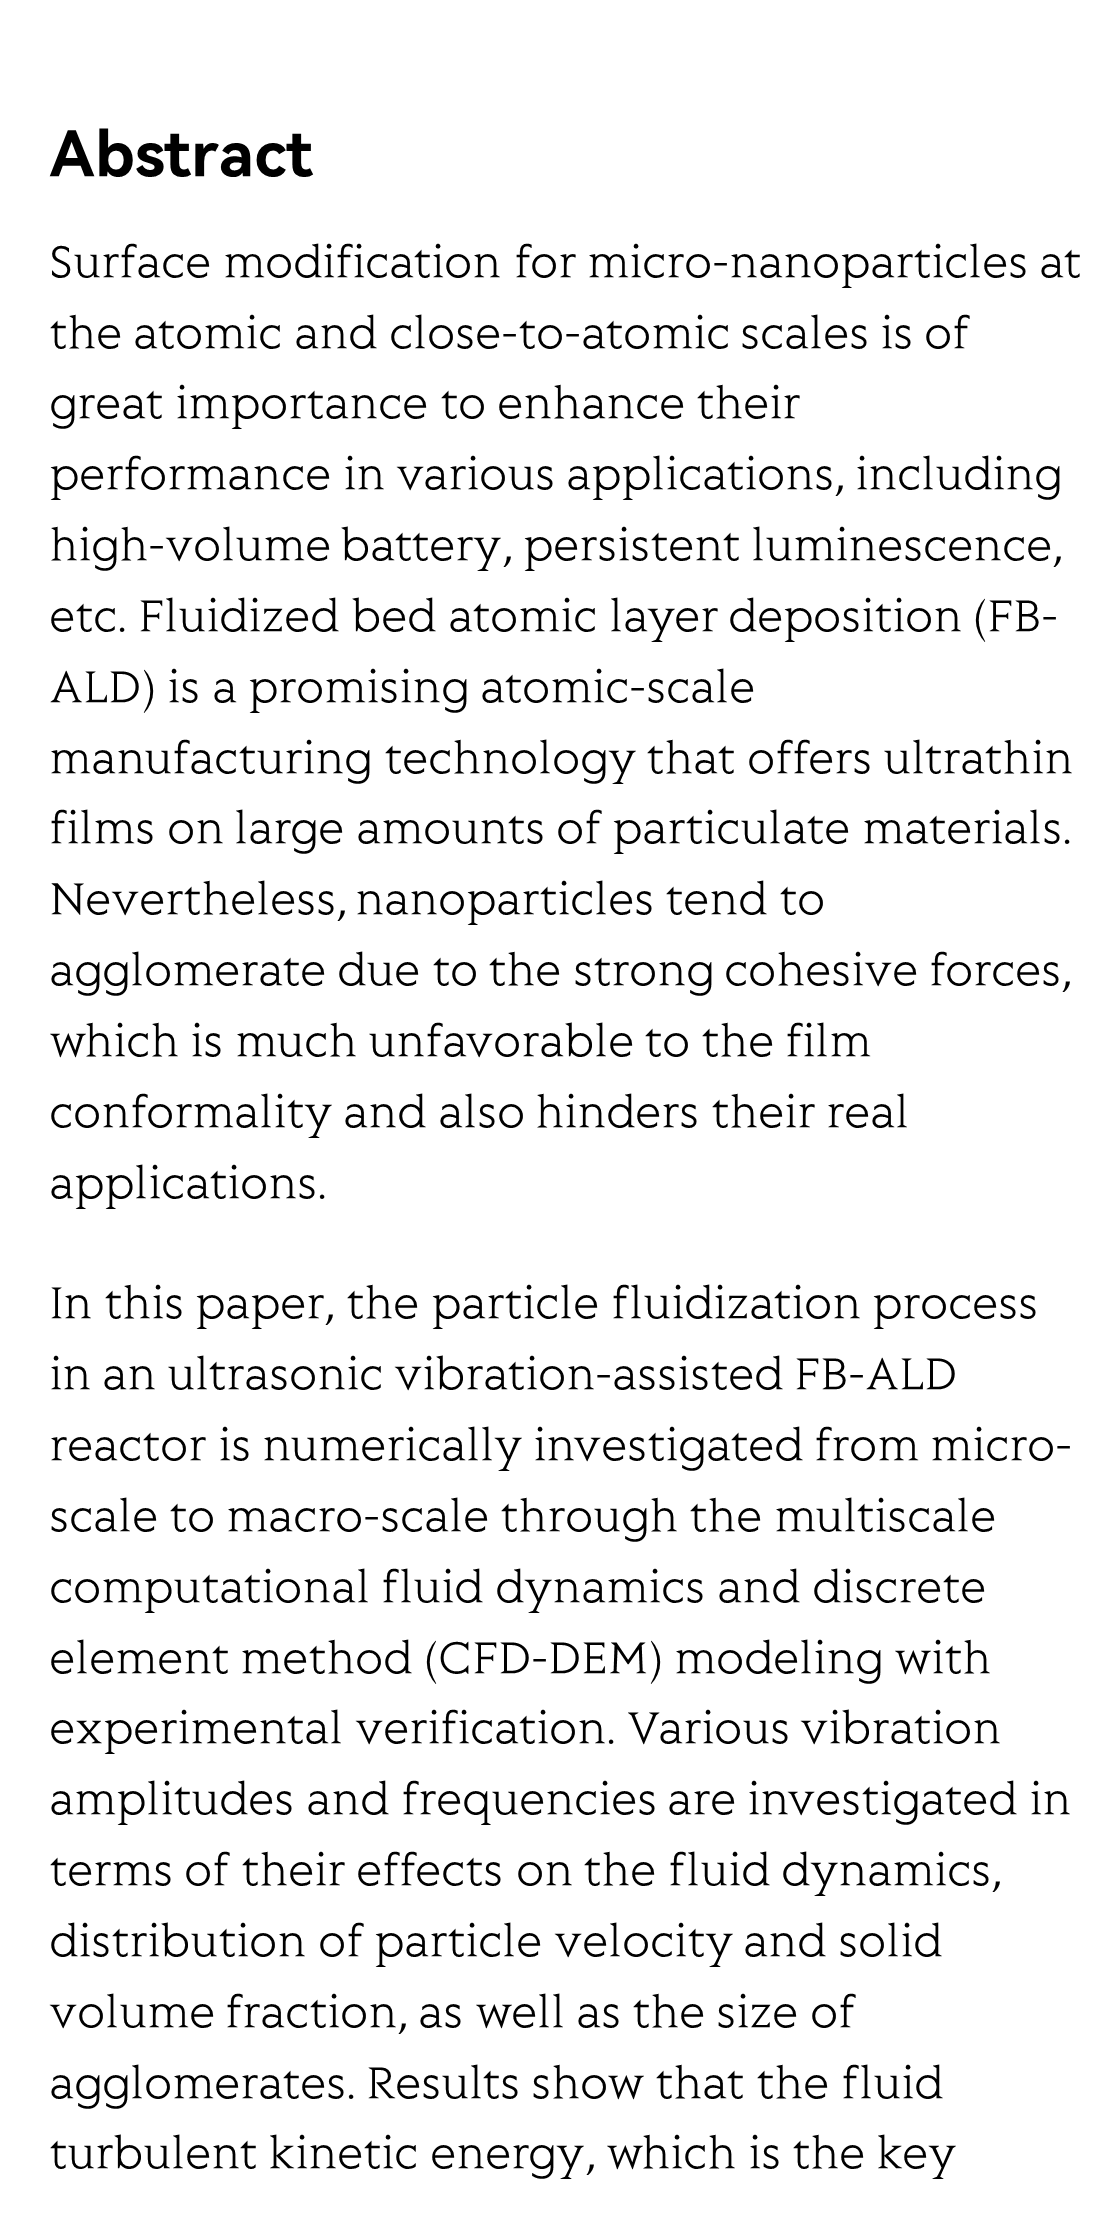 A combined multiscale modeling and experimental study on surface modification of high-volume micro-nanoparticles with atomic accuracy_2